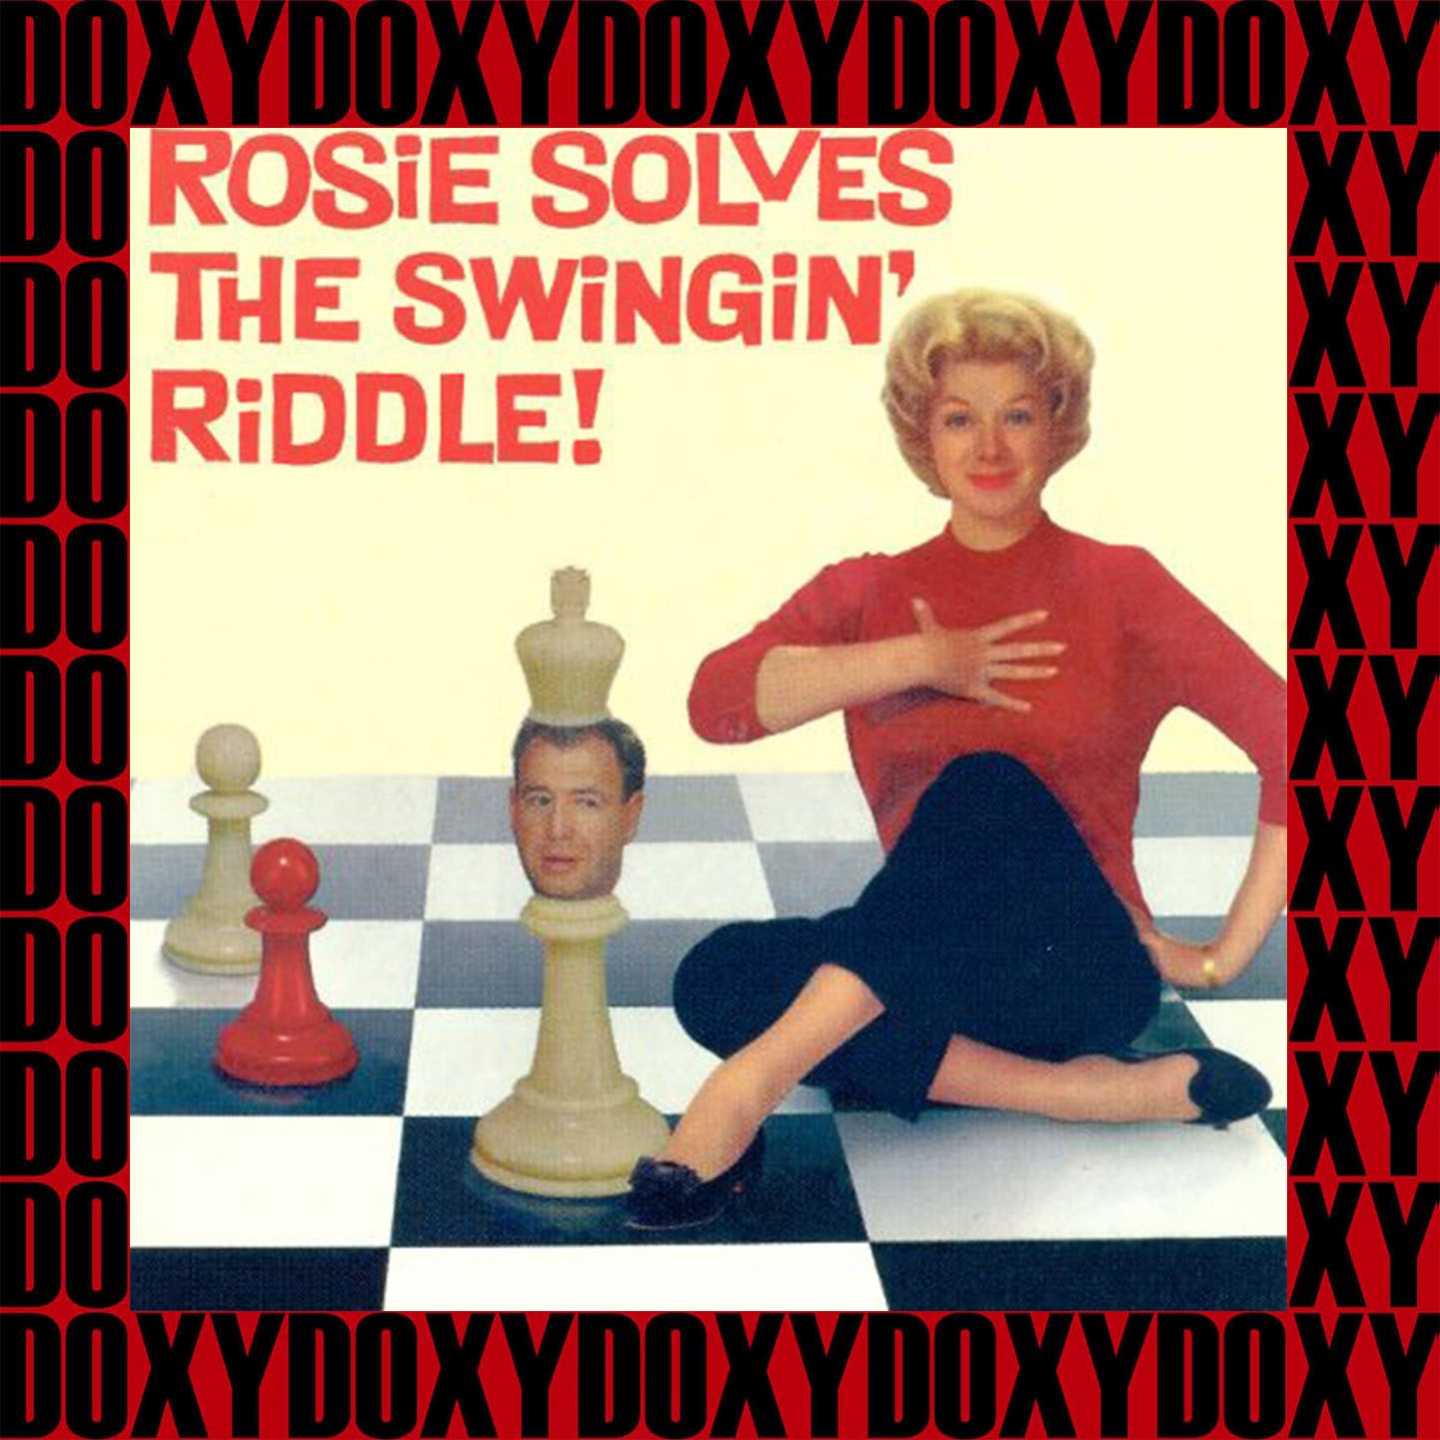 Rosie Solves the Swingin' Riddle! (Bluebird First, Remastered Version) (Doxy Collection)